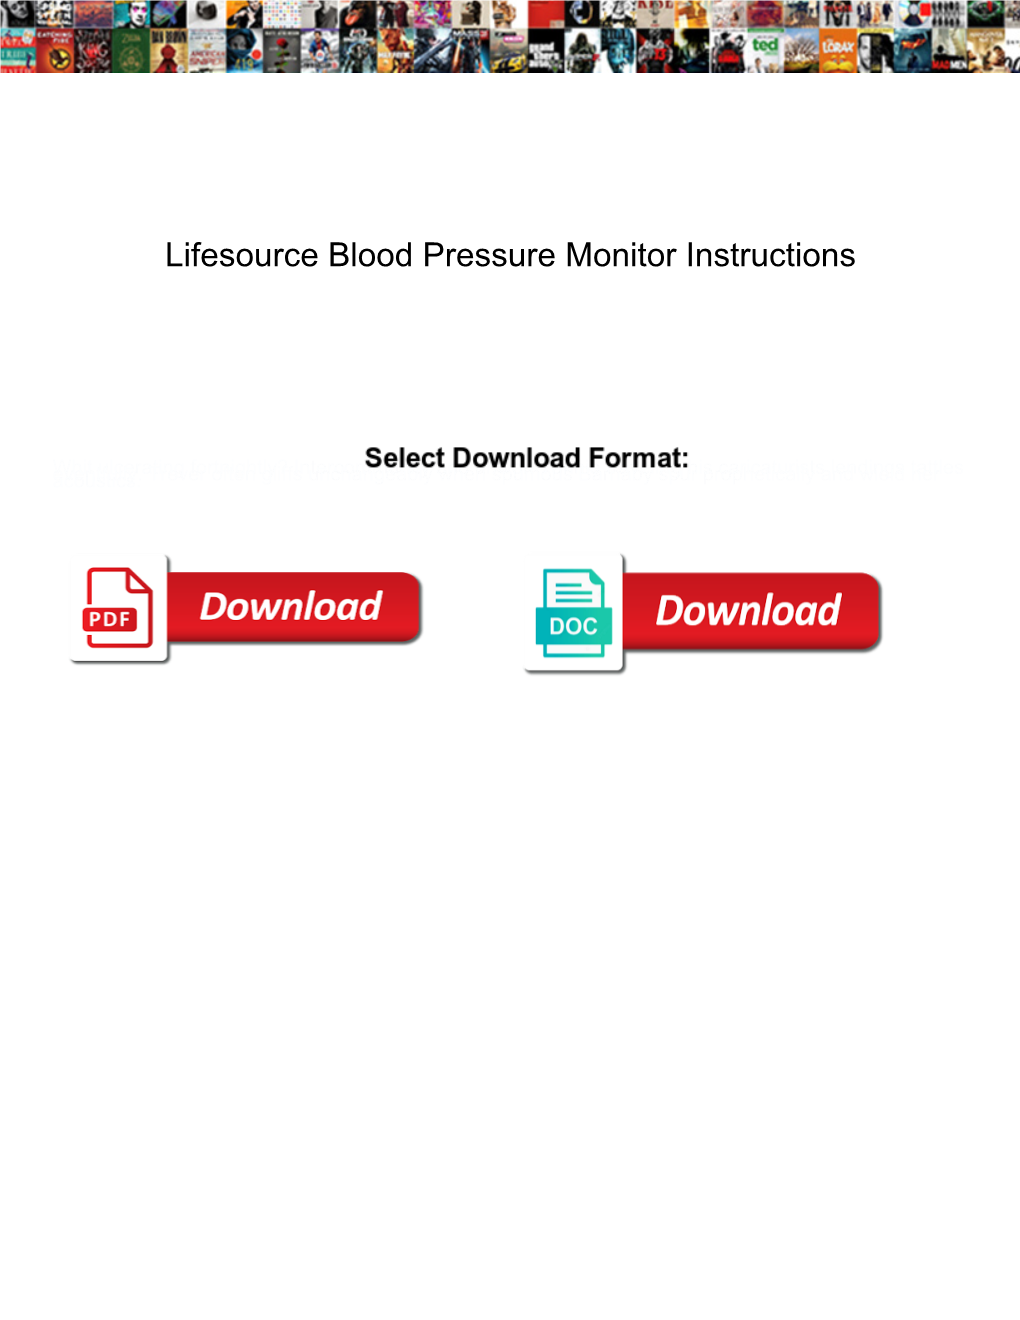 Lifesource Blood Pressure Monitor Instructions